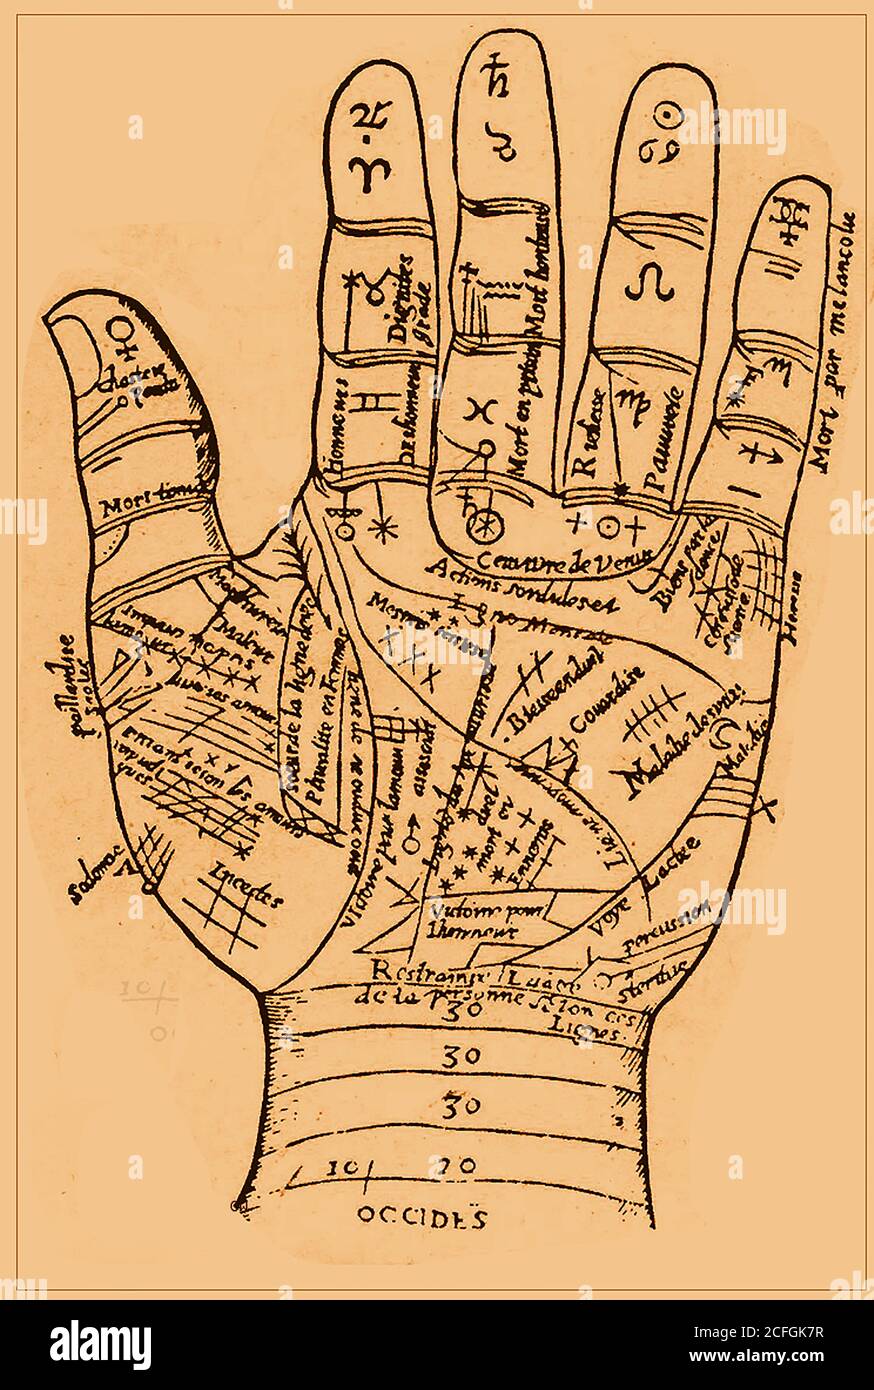 Palmistry / Chiromancy / Cheiromancy / Palm Reading /  Chirology- An ancient chart showing the lines of the hand, their  meanings and their relationship to the signs of the zodiac. Stock Photo